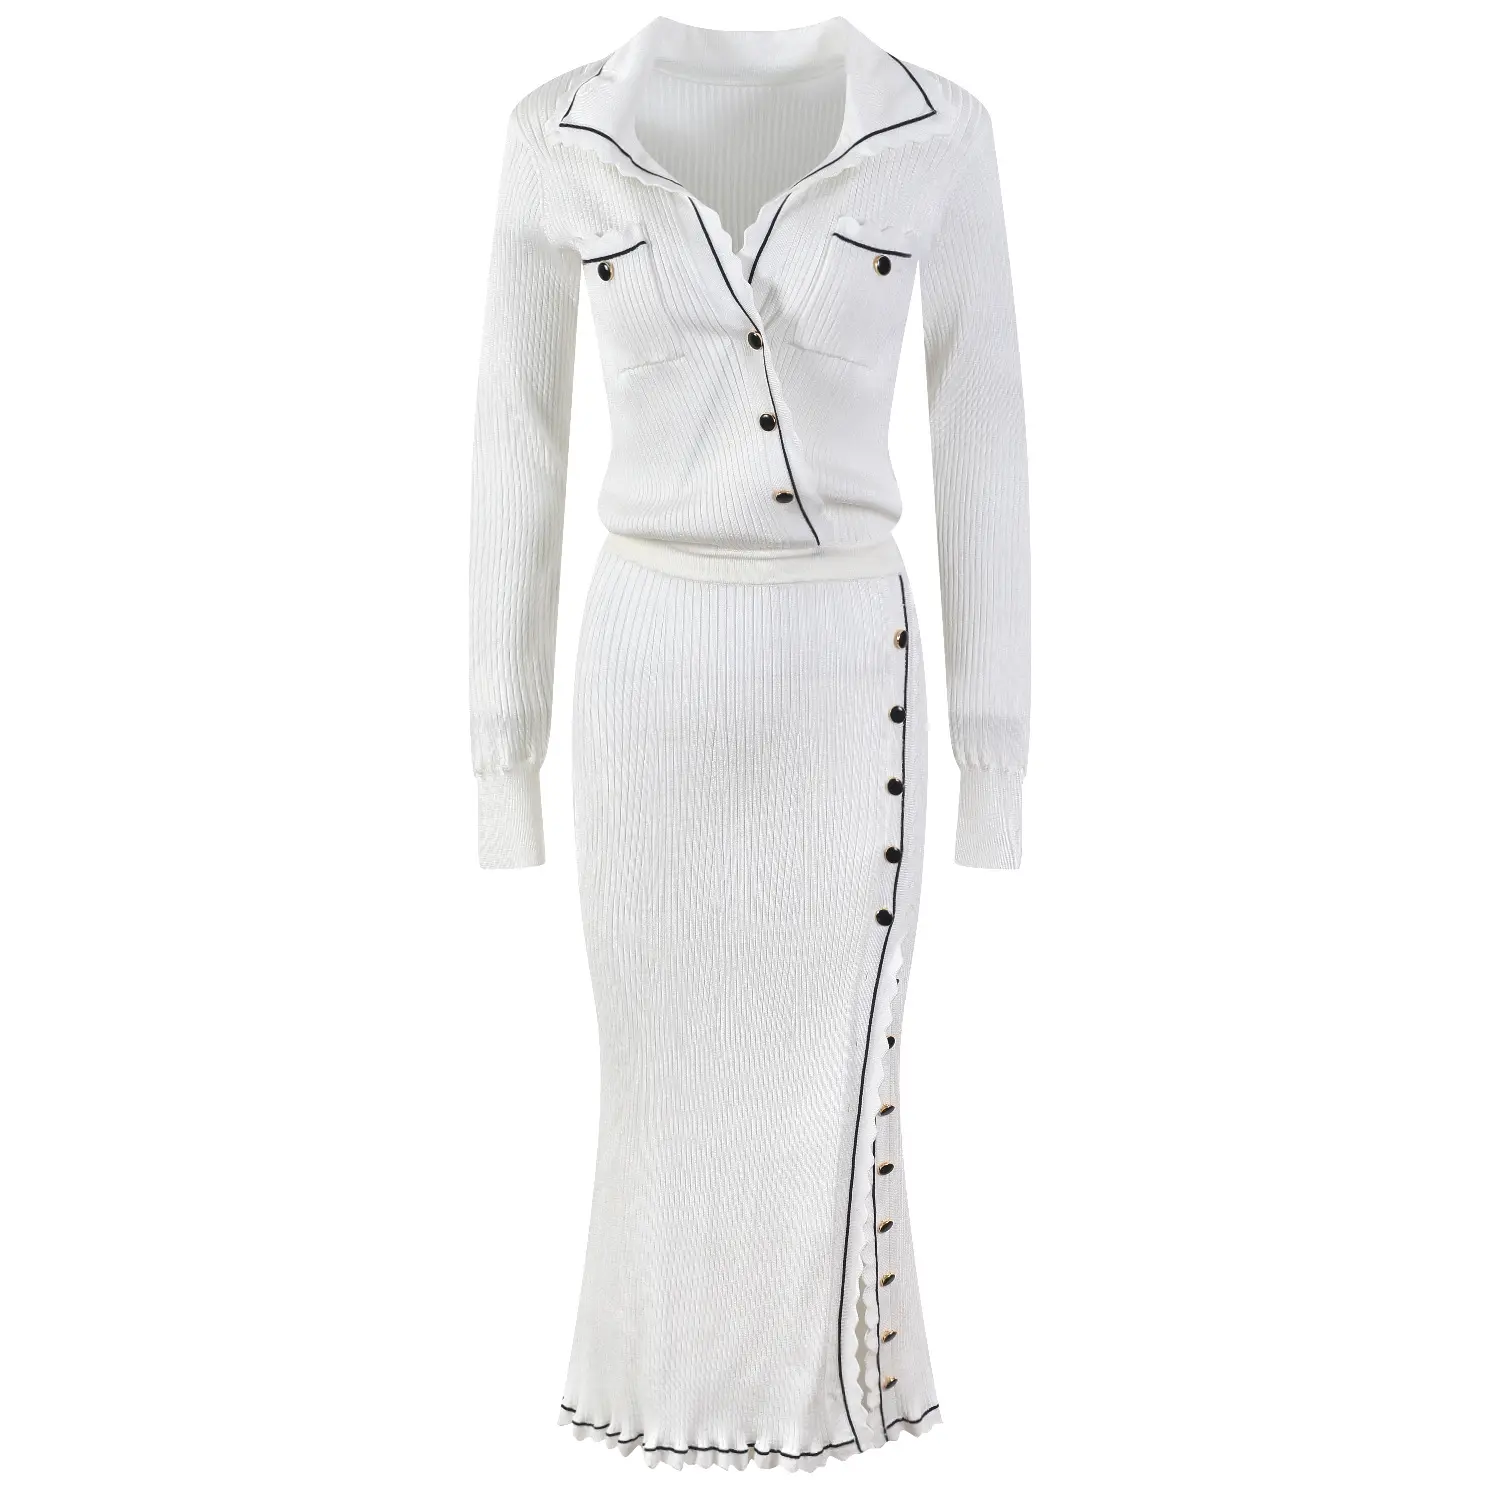 2023 Spring Lady Vintage Designed Turn-down Collar Long Sleeve Single-breasted Stitching Slim Fitted Women Midi Dress